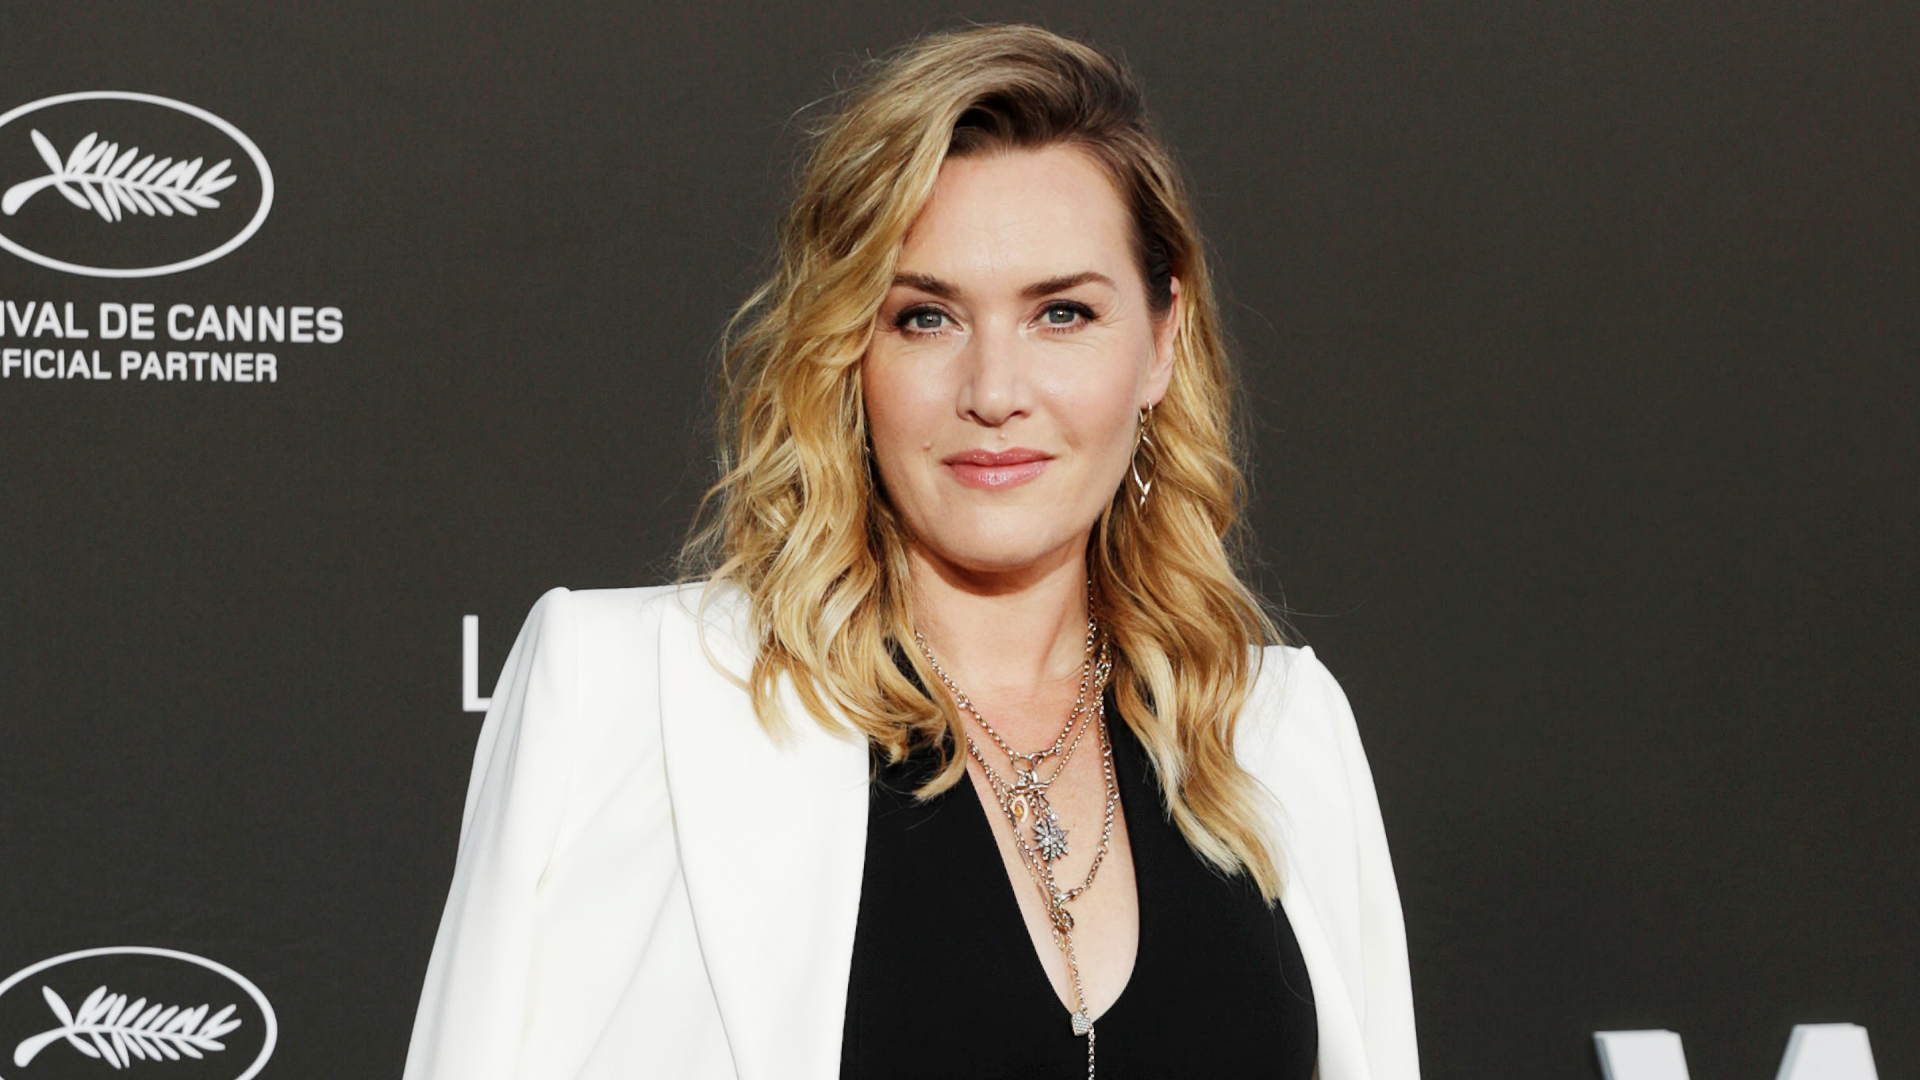 Kate Winslet generously donated £17,000 after hearing about the mum-of four's struggle.